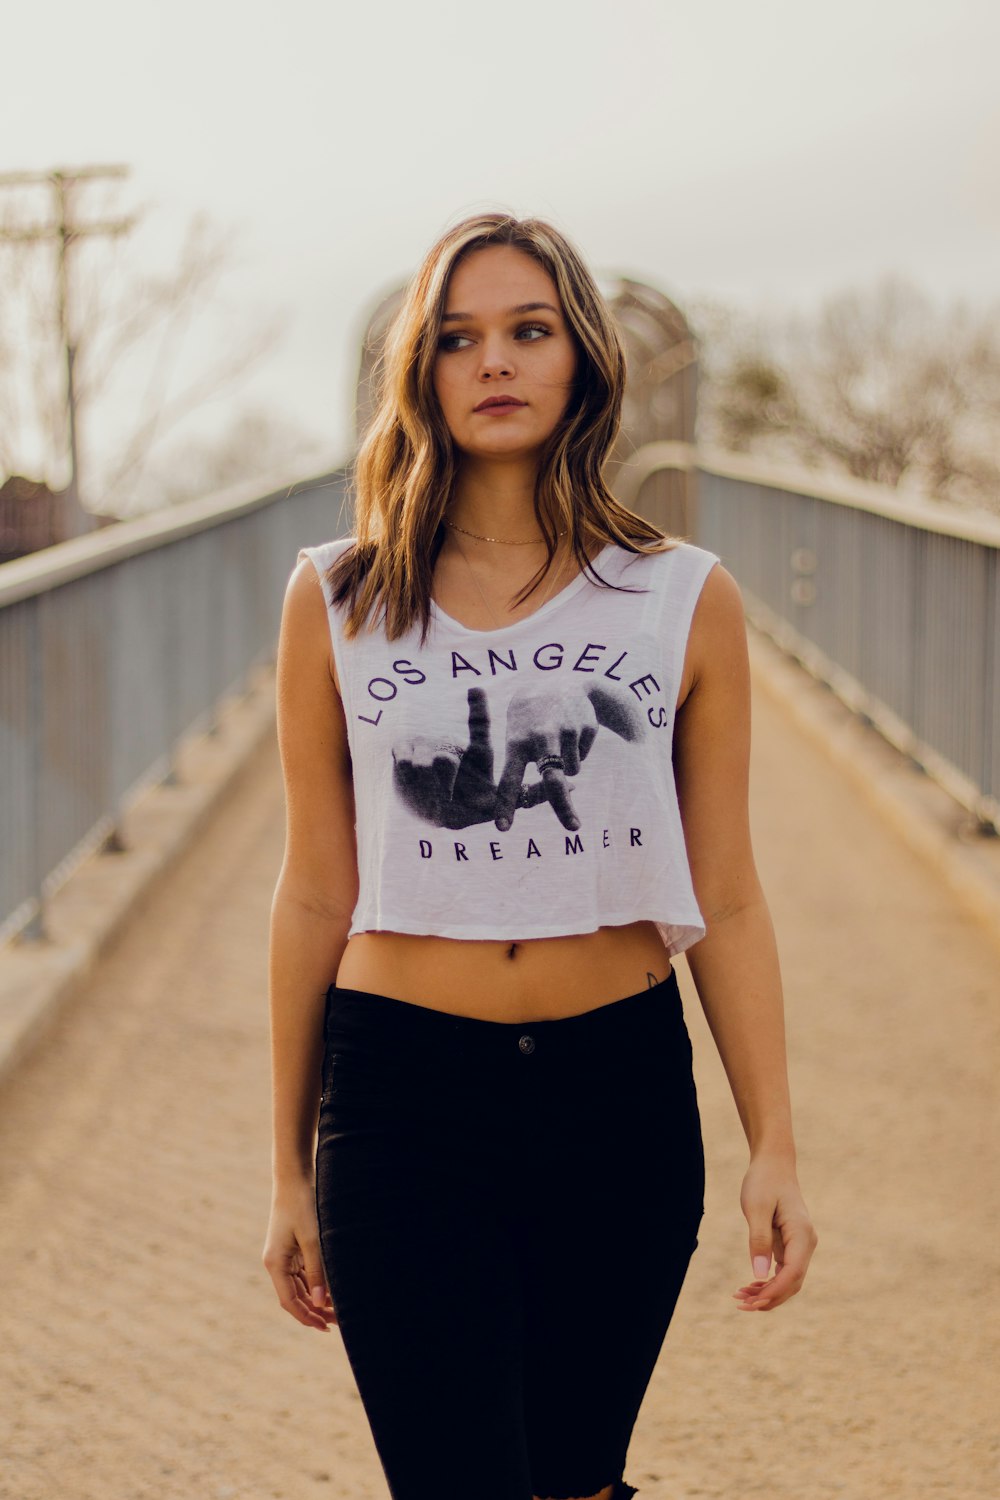 750+ Crop Top Pictures [HD] | Download Free Images on Unsplash